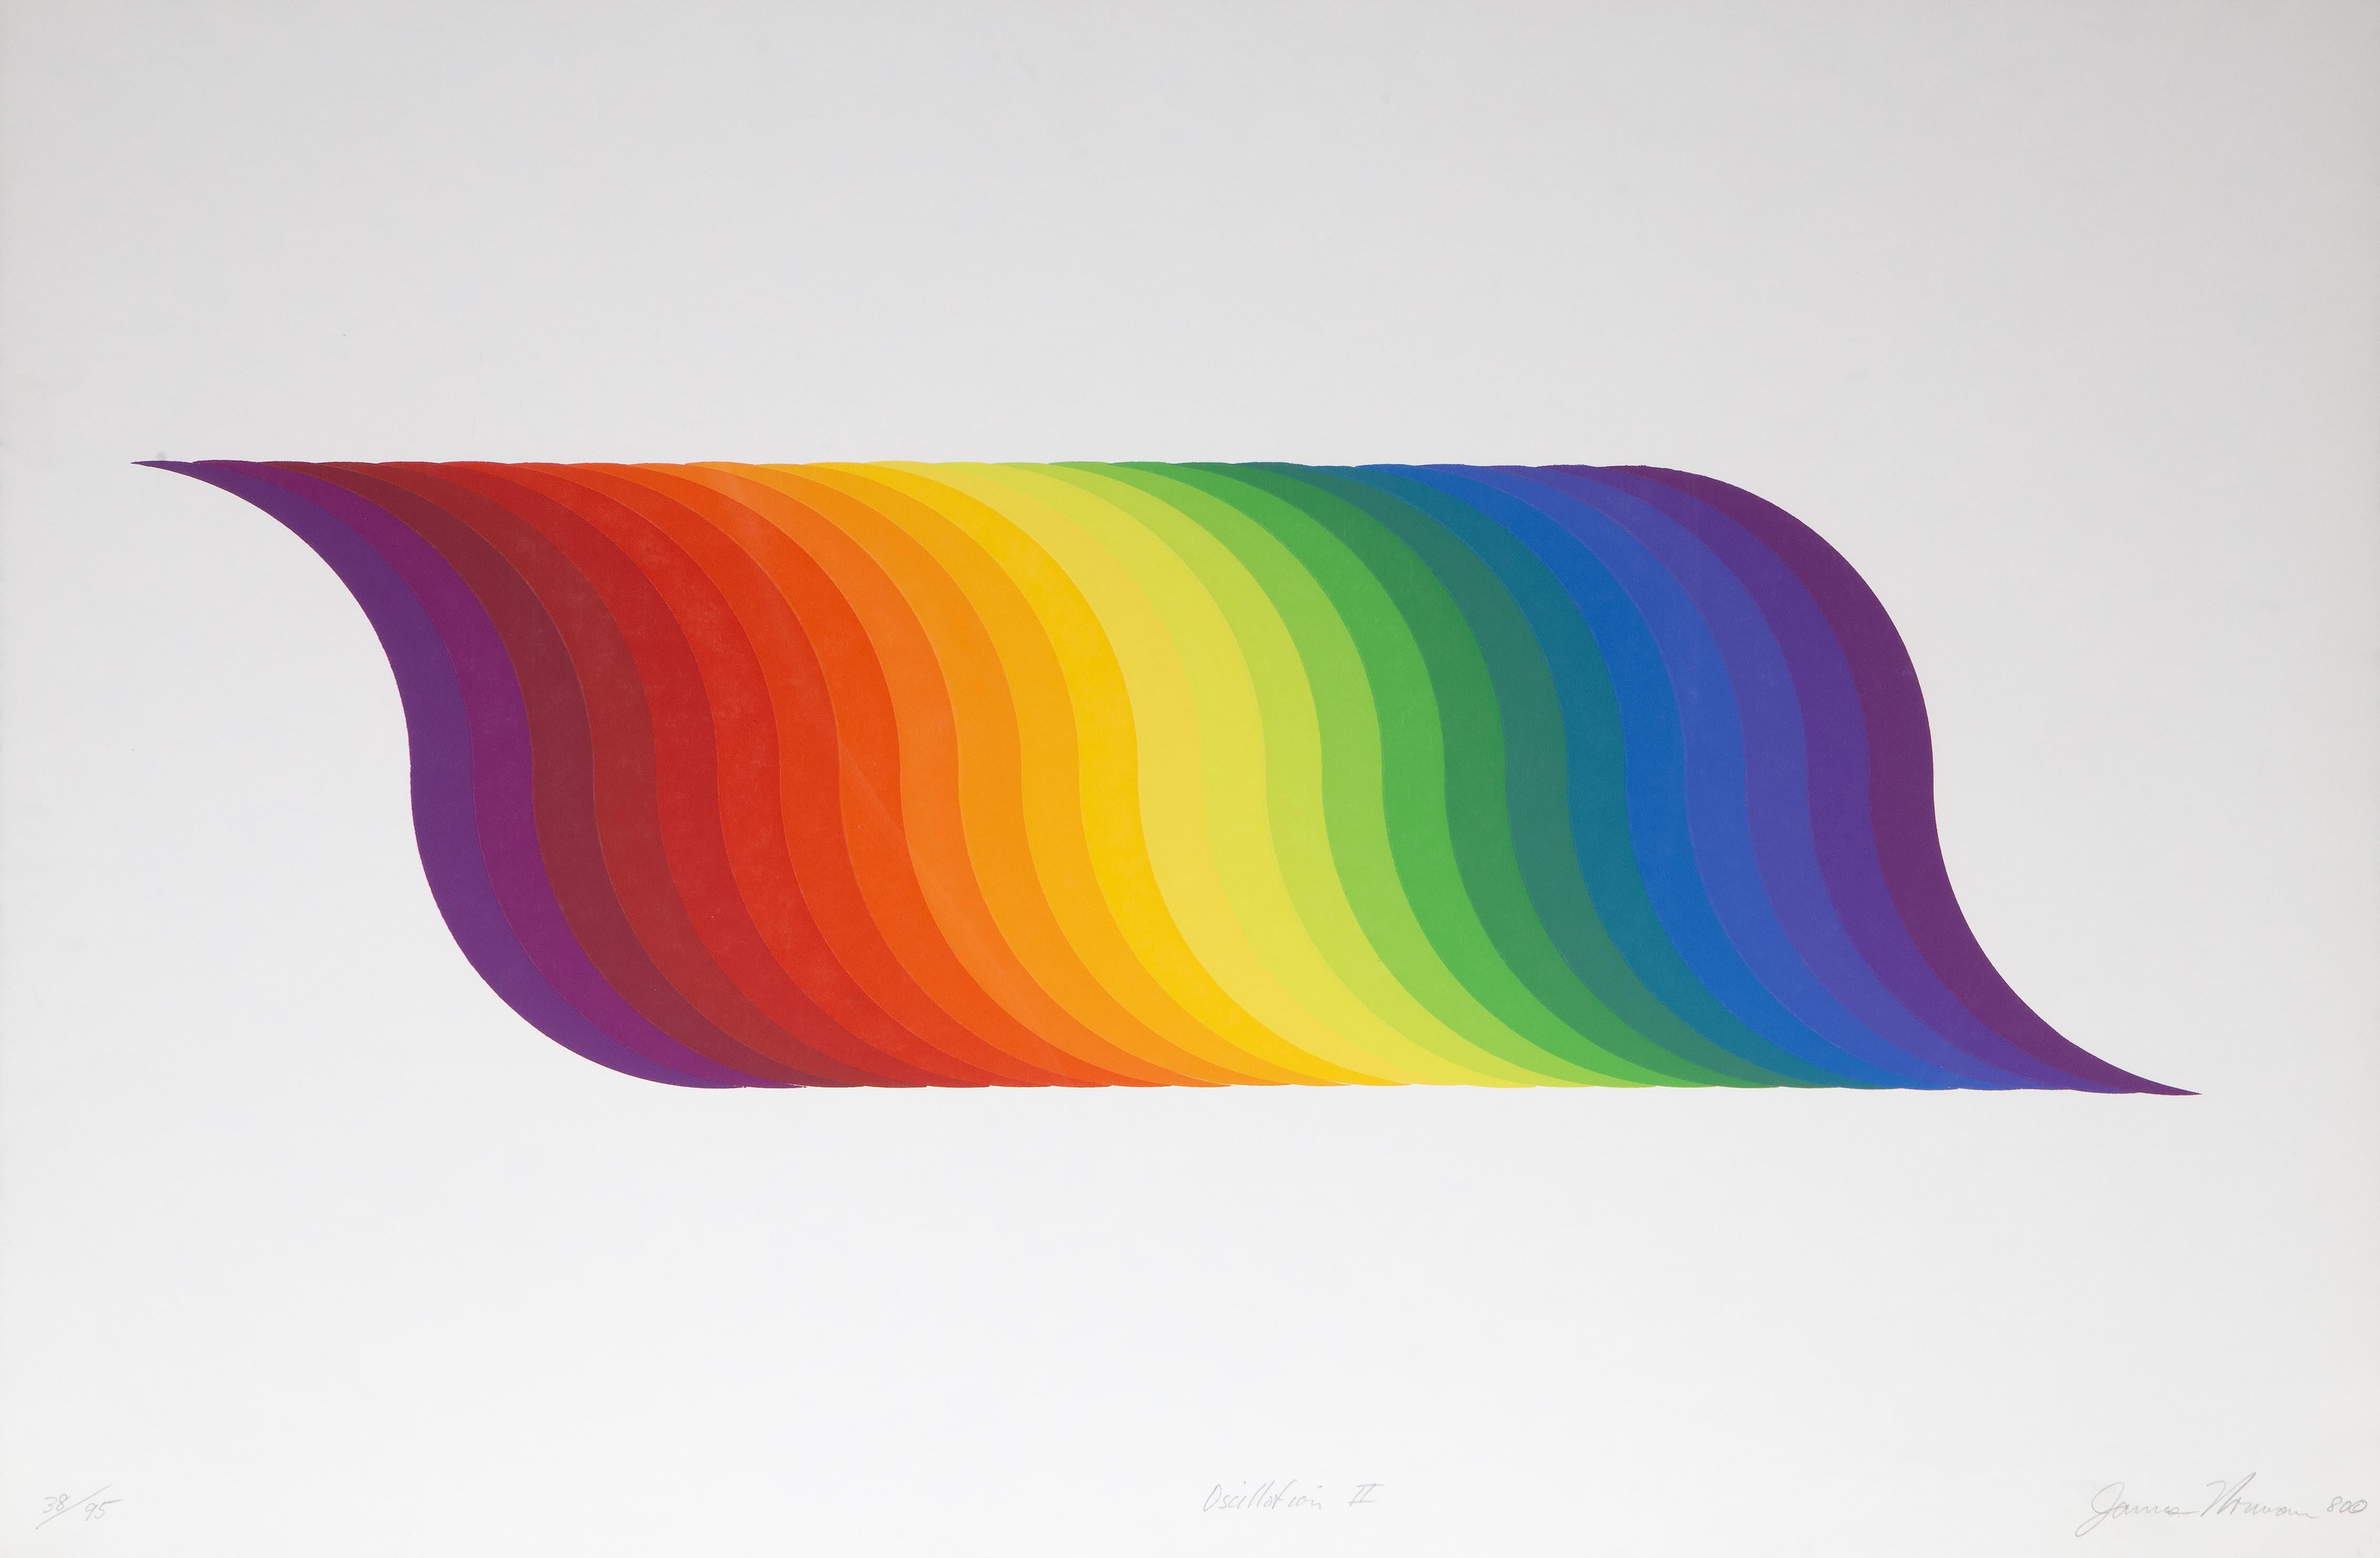 Artist: James Norman, American (1927 - 2011)
Title: Oscillation II
Year: 1980
Medium: Screenprint, signed and numbered in pencil
Edition: 38/95
Image Size: 10 x 32 inches
Size: 25 x 38 in. (63.5 x 96.52 cm)